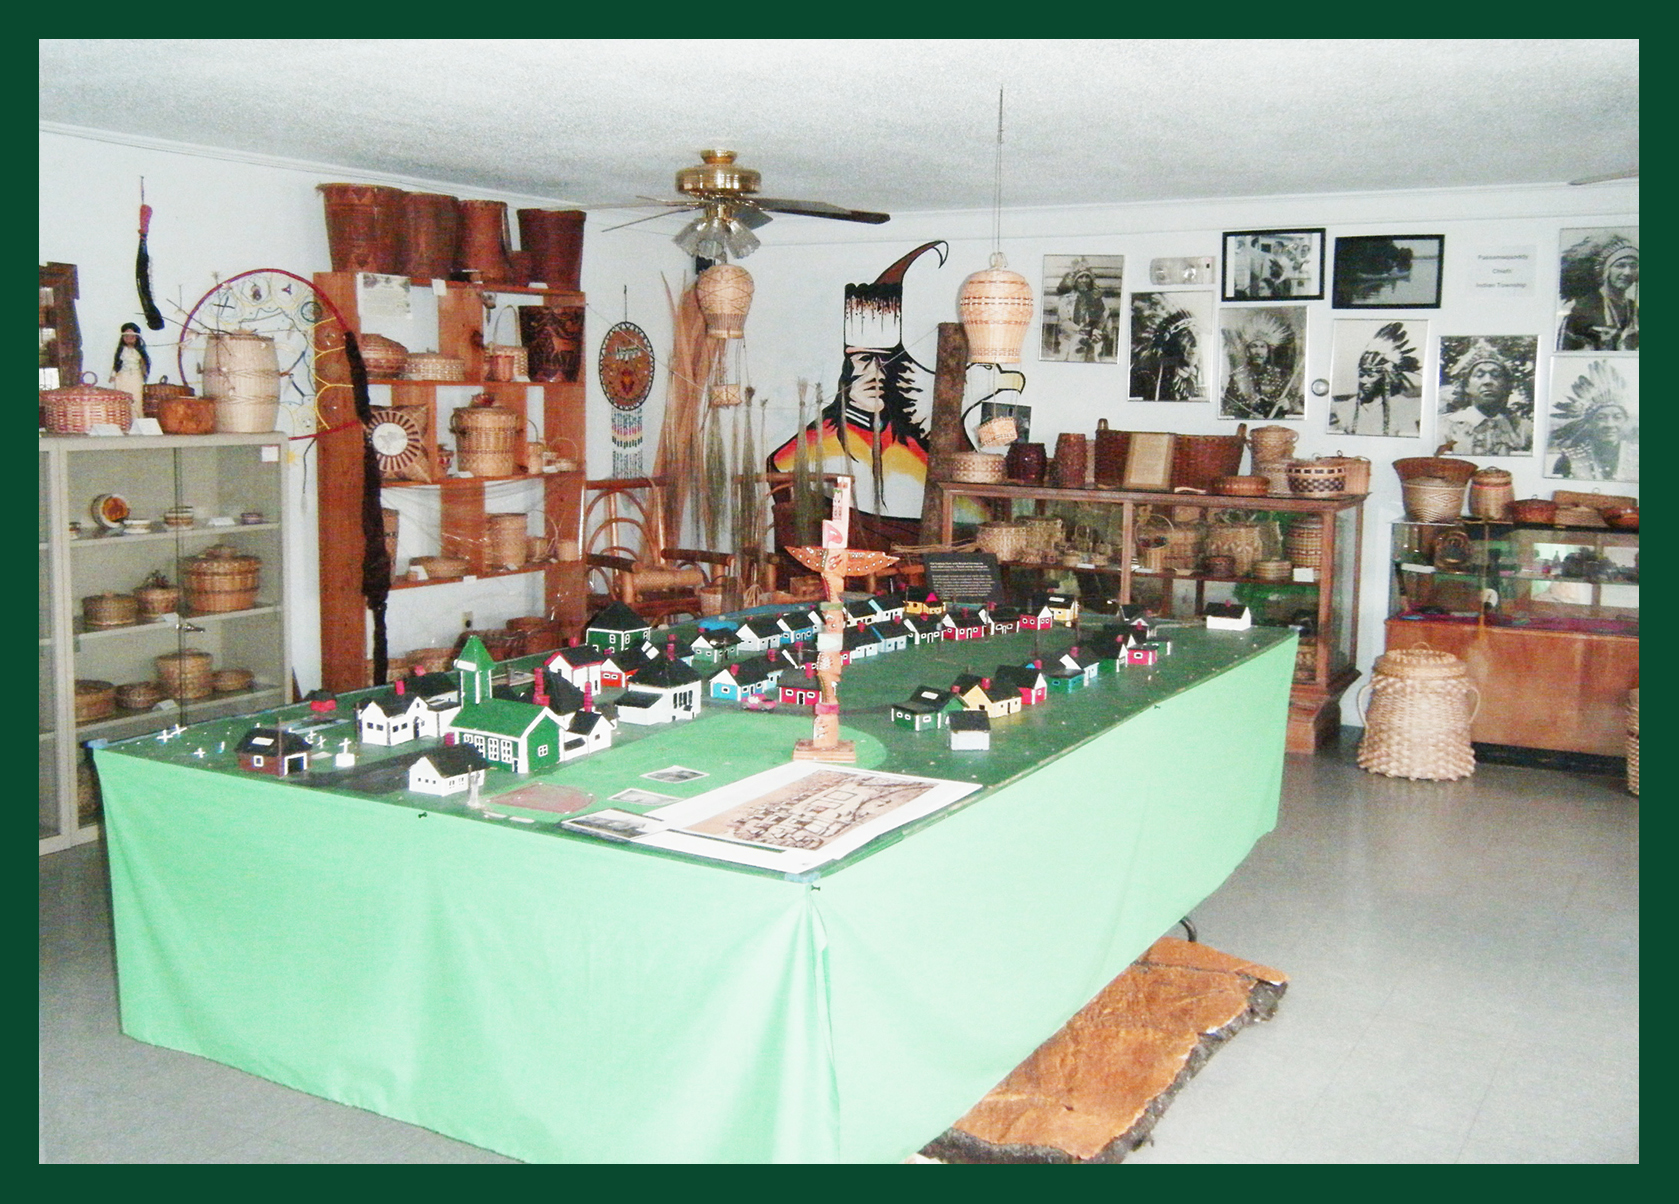 Passamaquoddy Cultural Heritage Museum on Indian Township